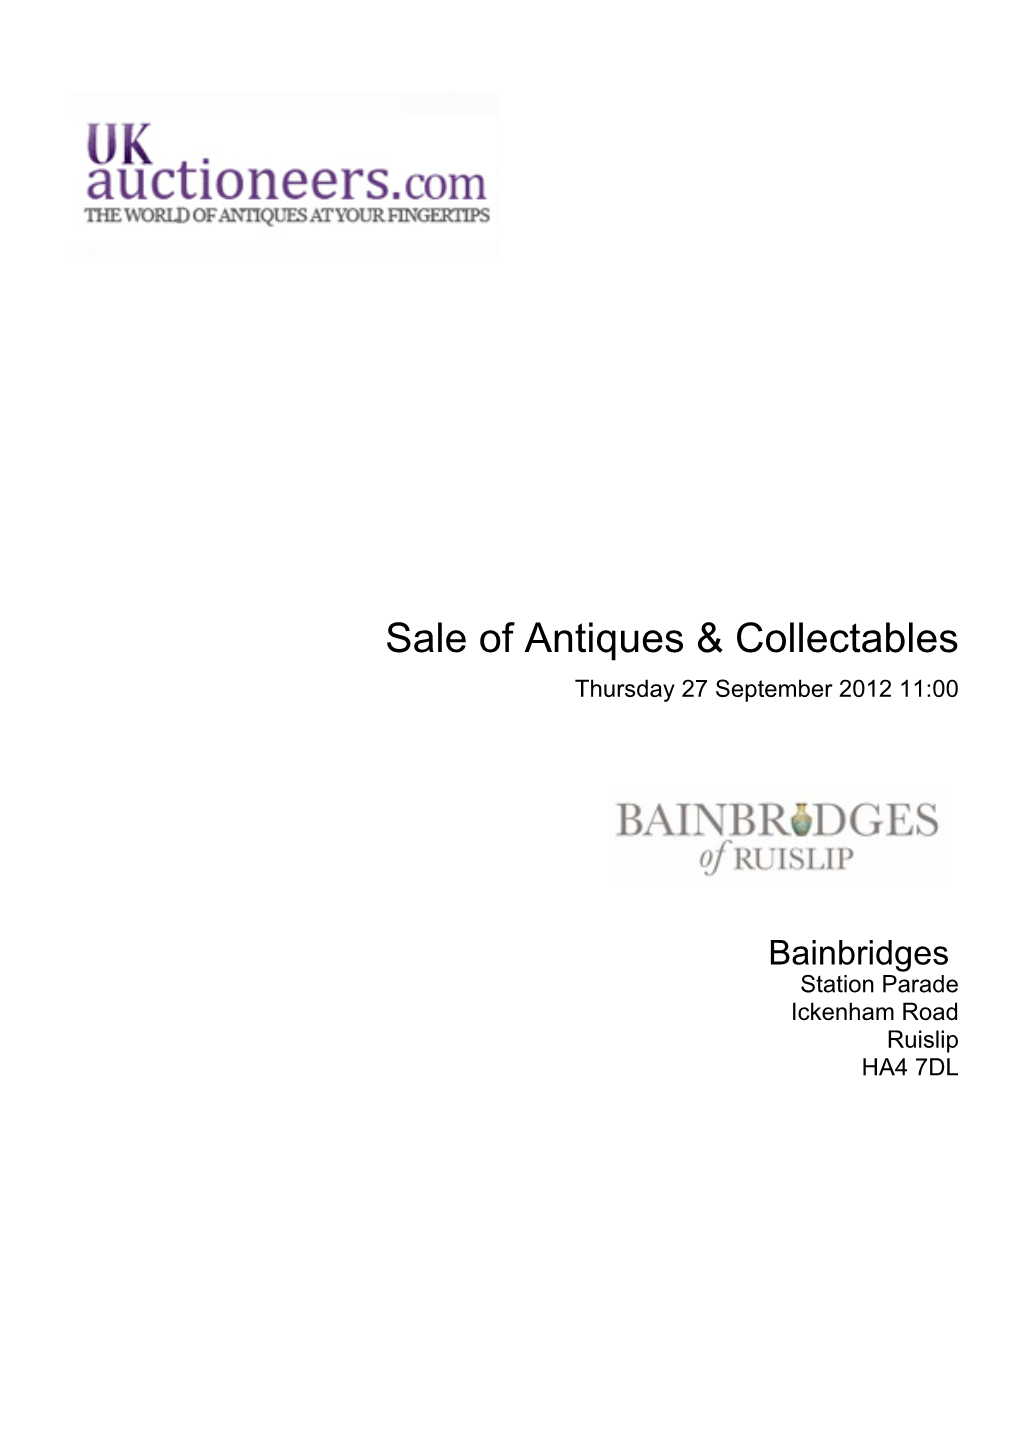 Sale of Antiques & Collectables